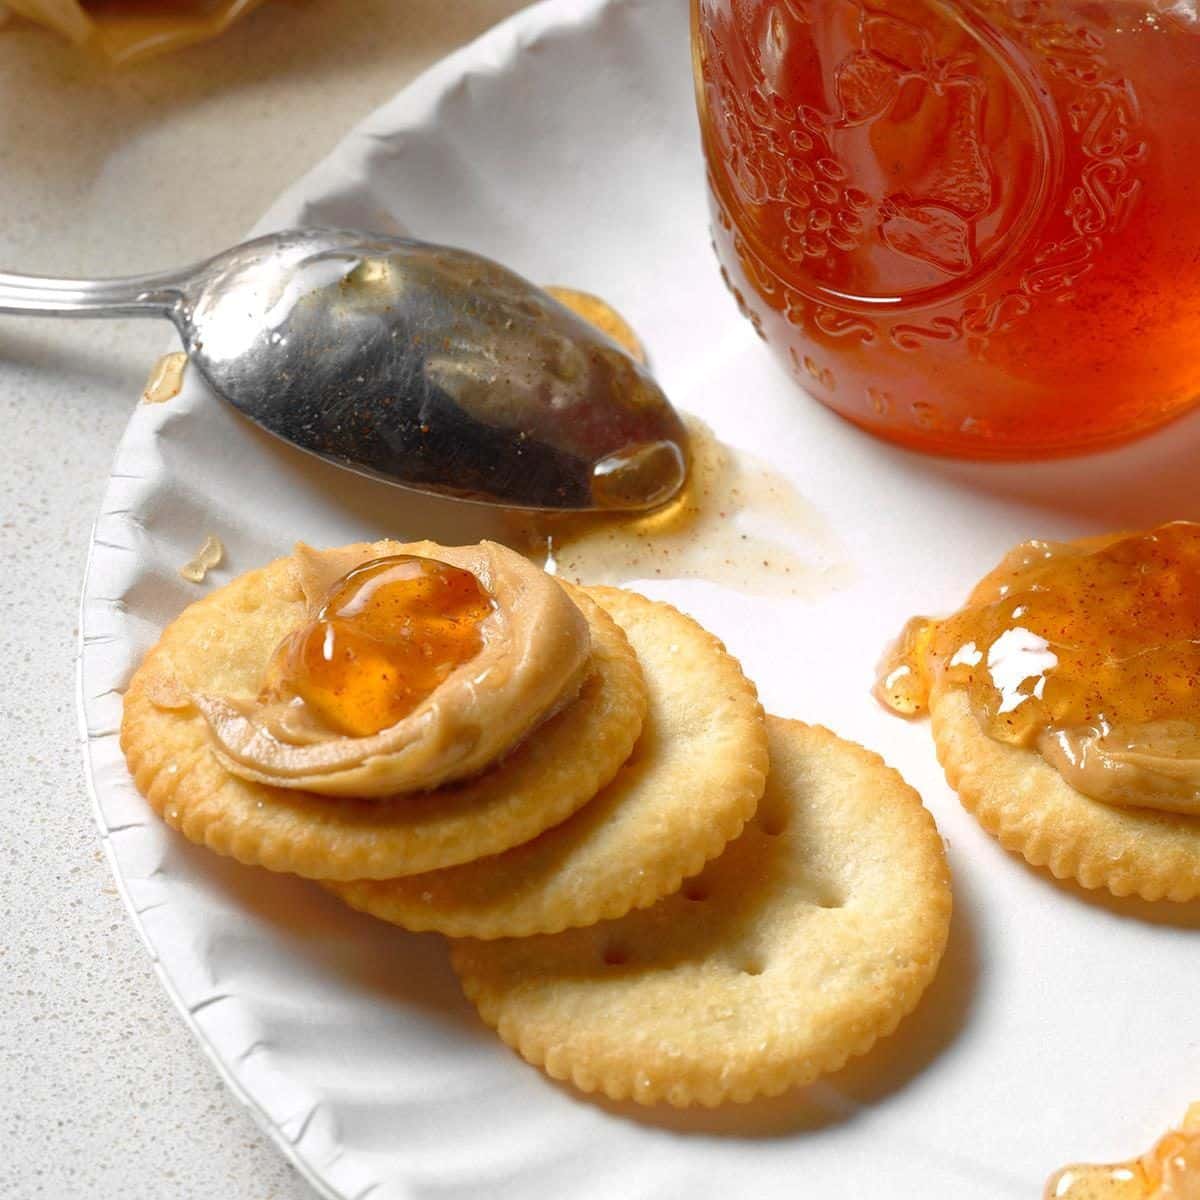 Apple cinnamon jelly in a glass jar and on crackers.